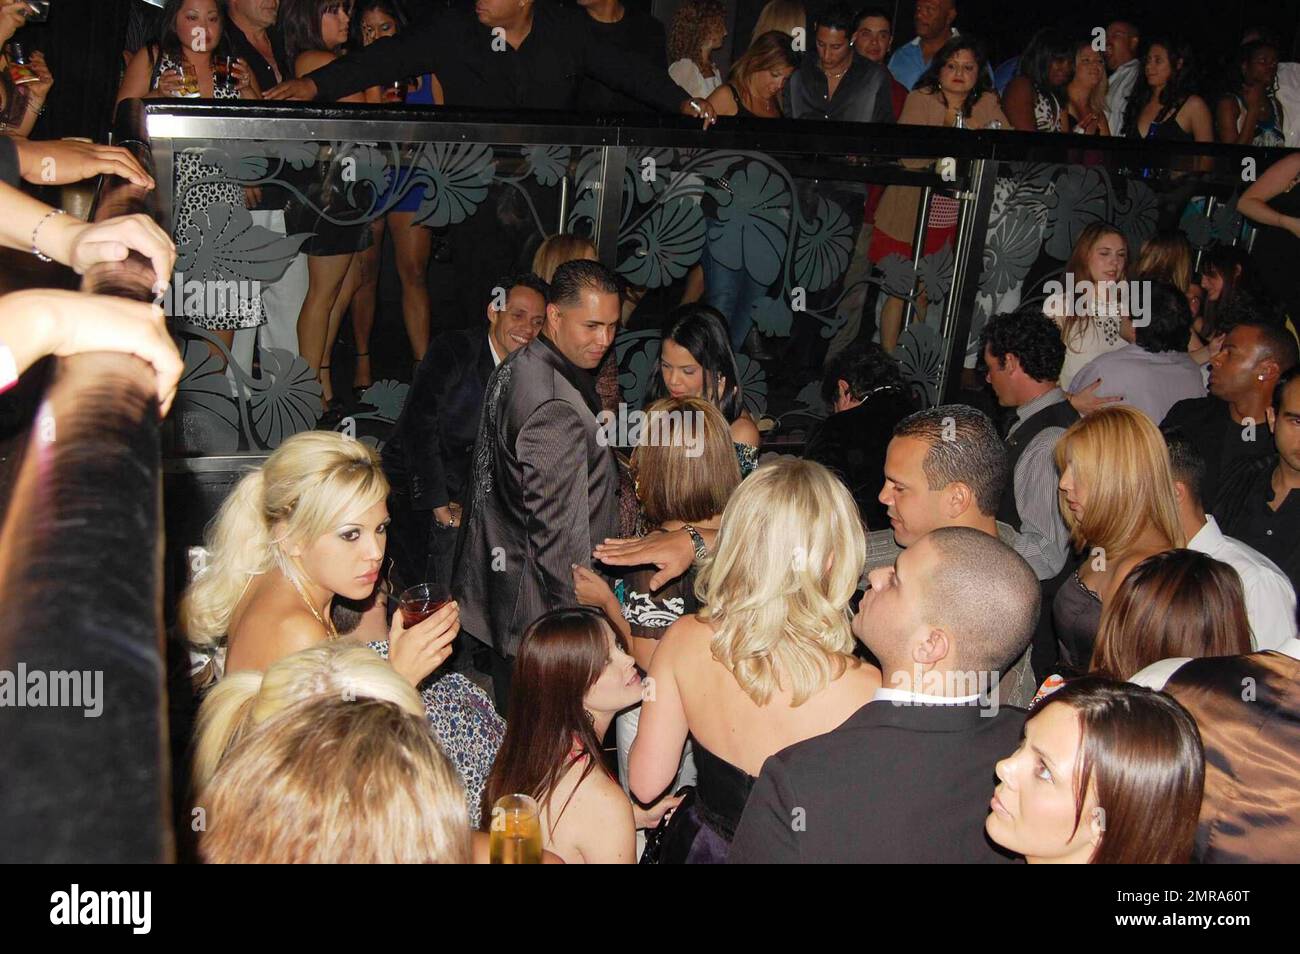 Exclusive!! Jennifer Lopez and Marc Anthony look the picture of love at Bank nightclub in Las Vegas.  The couple were surrounded by security as they chilled in the VIP area of the club.  Las Vegas, NV 10/10/08 All Stock Photo